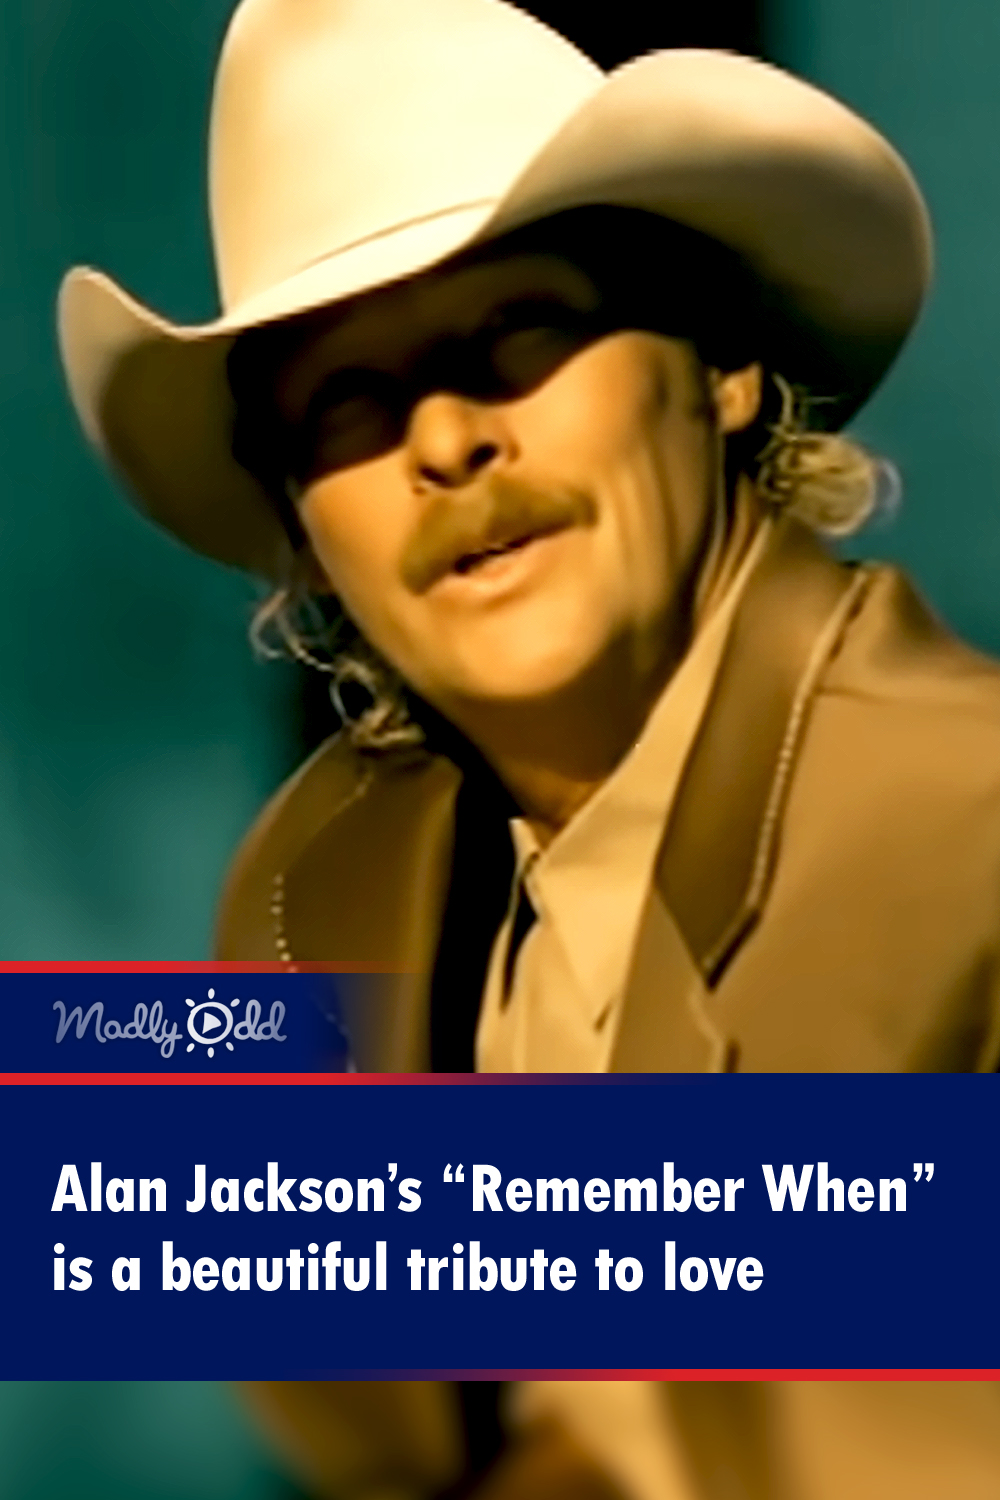 Alan Jackson’s “Remember When” is a beautiful tribute to love